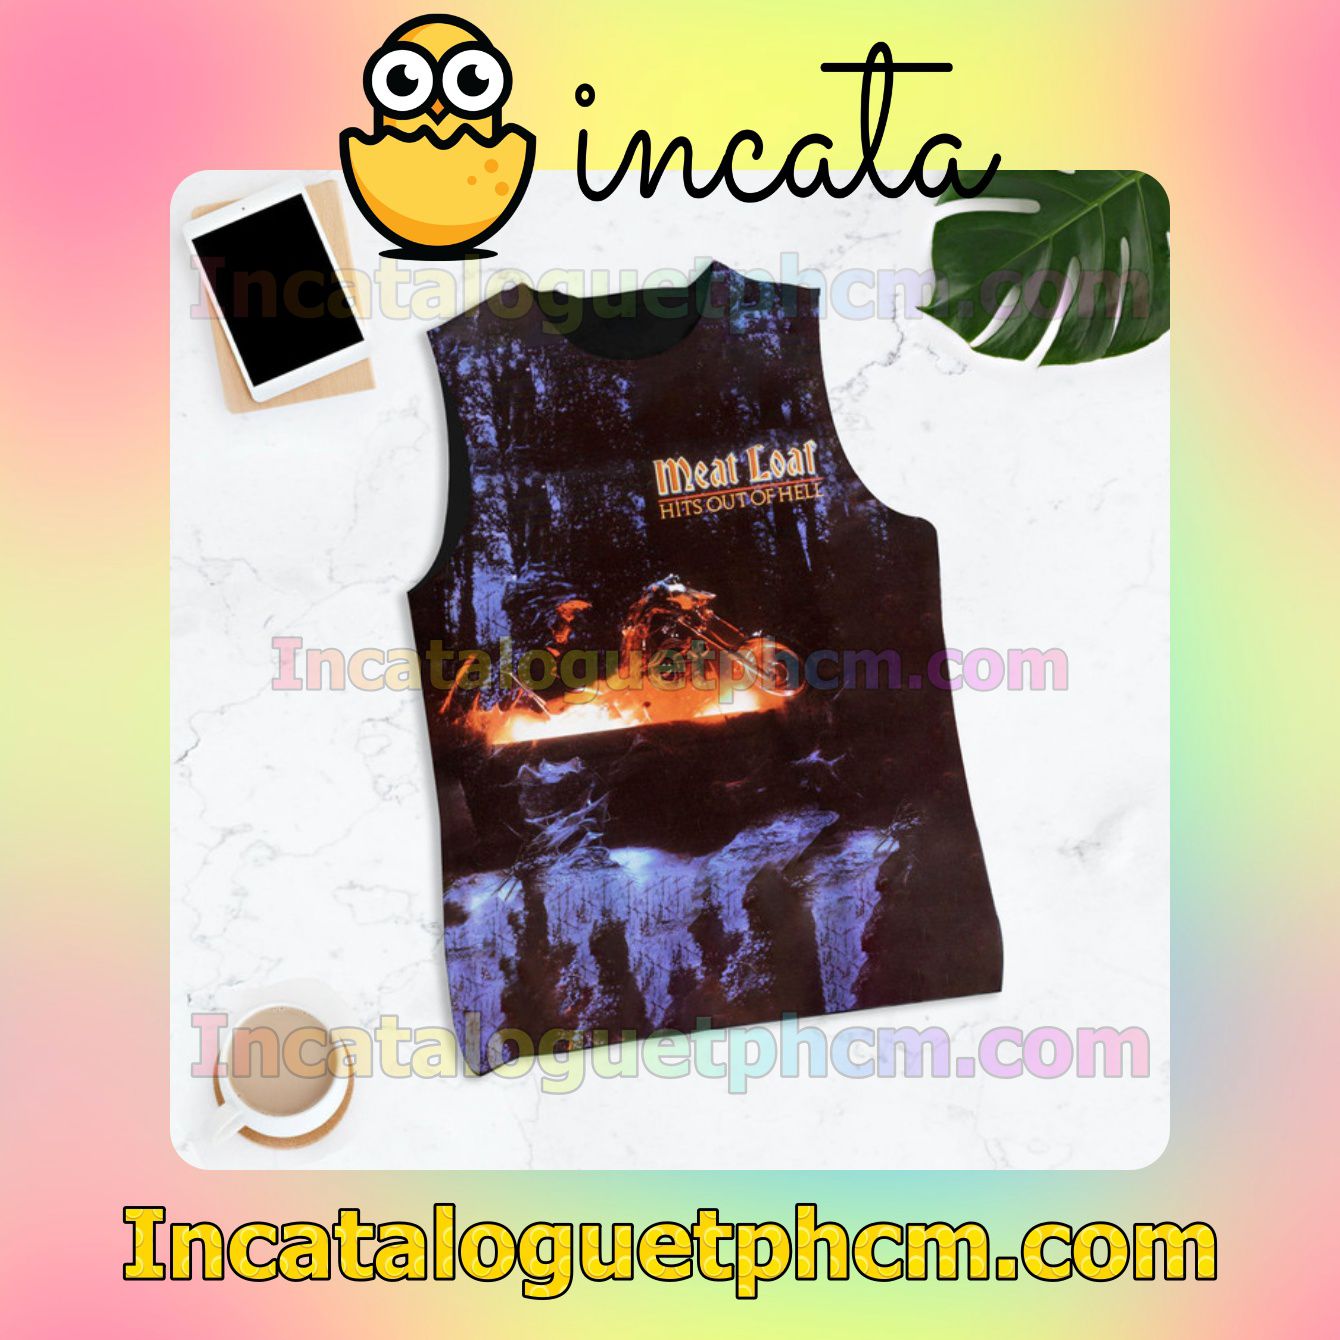 Meat Loaf Hits Out Of Hell Album Cover Sleeveless Racer Back Tank Tops